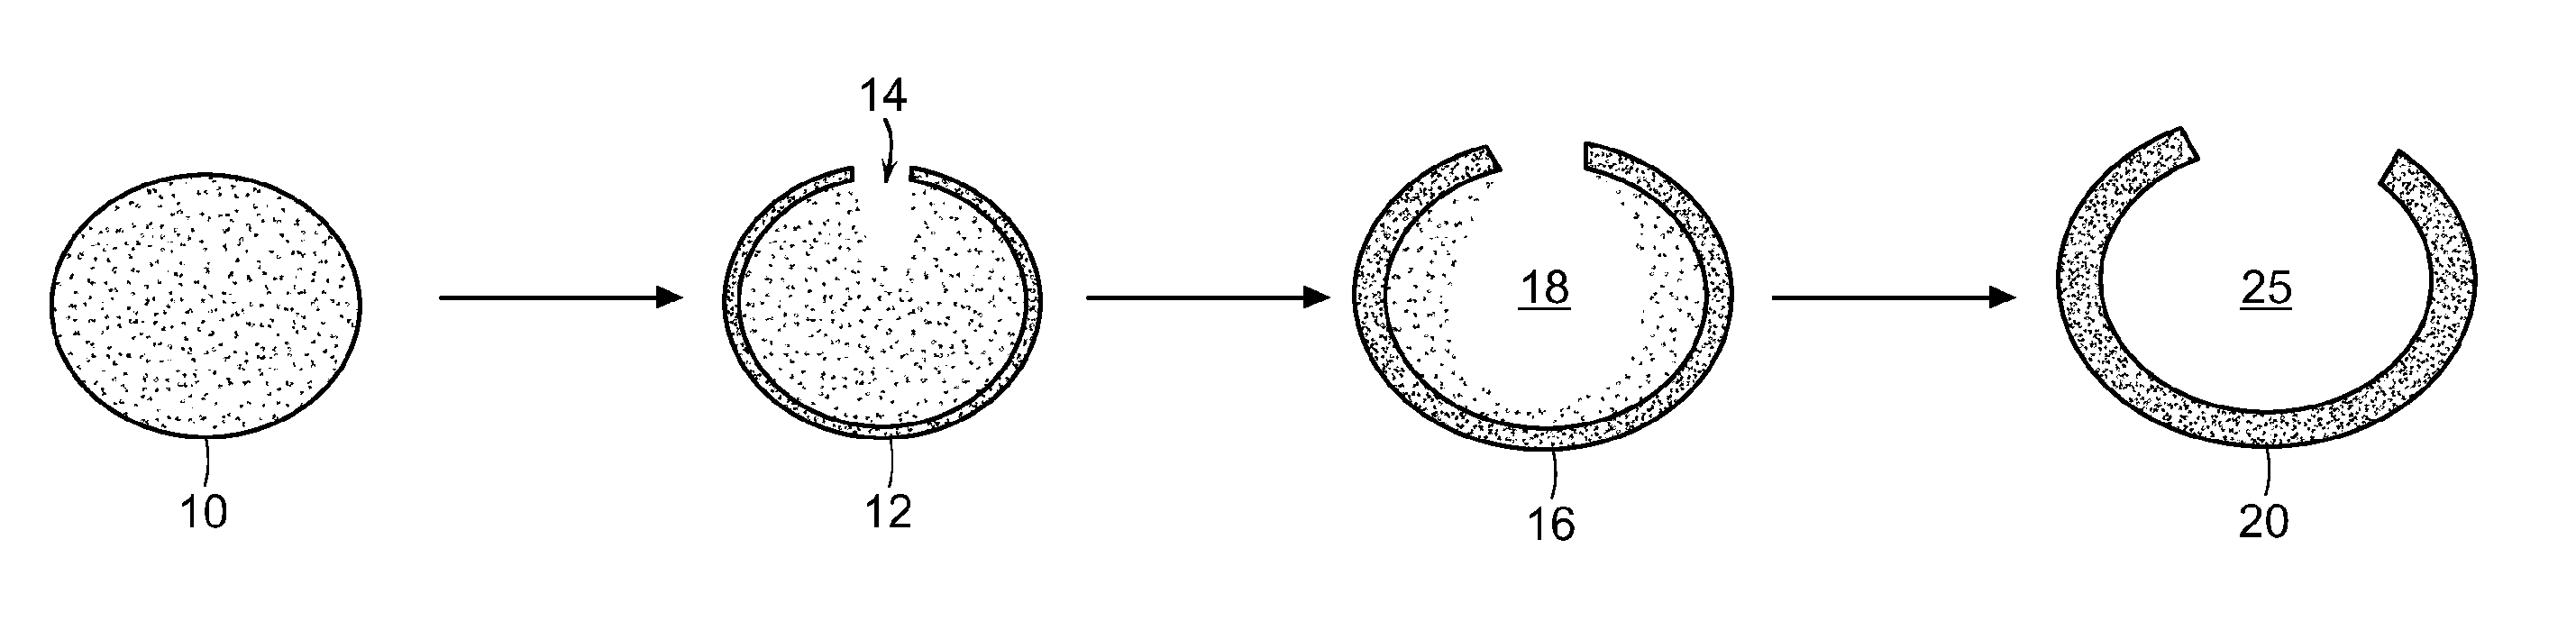 Methods for the fabrication of nanostructures